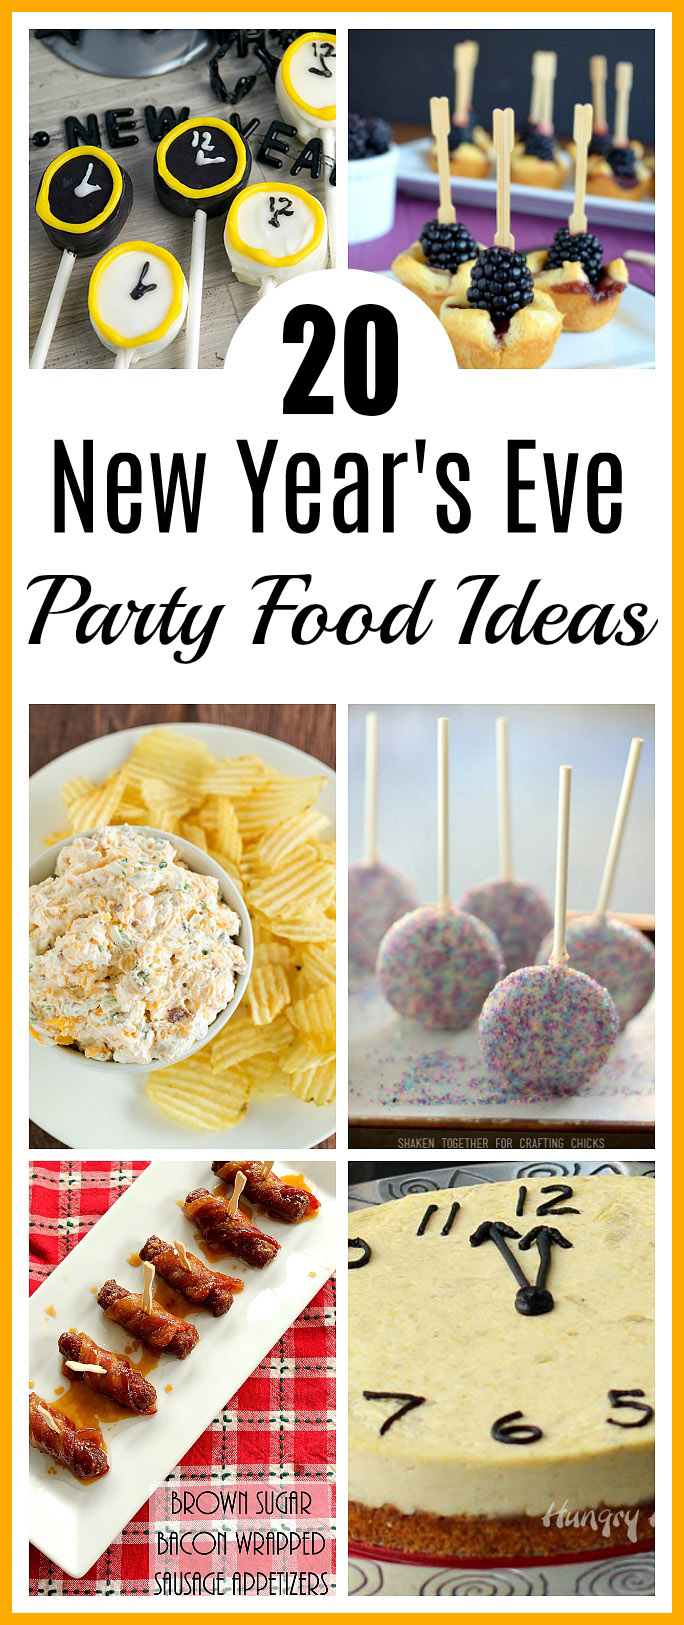 20 New Year's Eve Party Food Ideas- Bring in the New Year the tasty way with these delicious New Year's Eve party food ideas! You and your guests will love these recipes! #NewYearsEve #recipe #appetizer #partyFood #ACultivatedNest